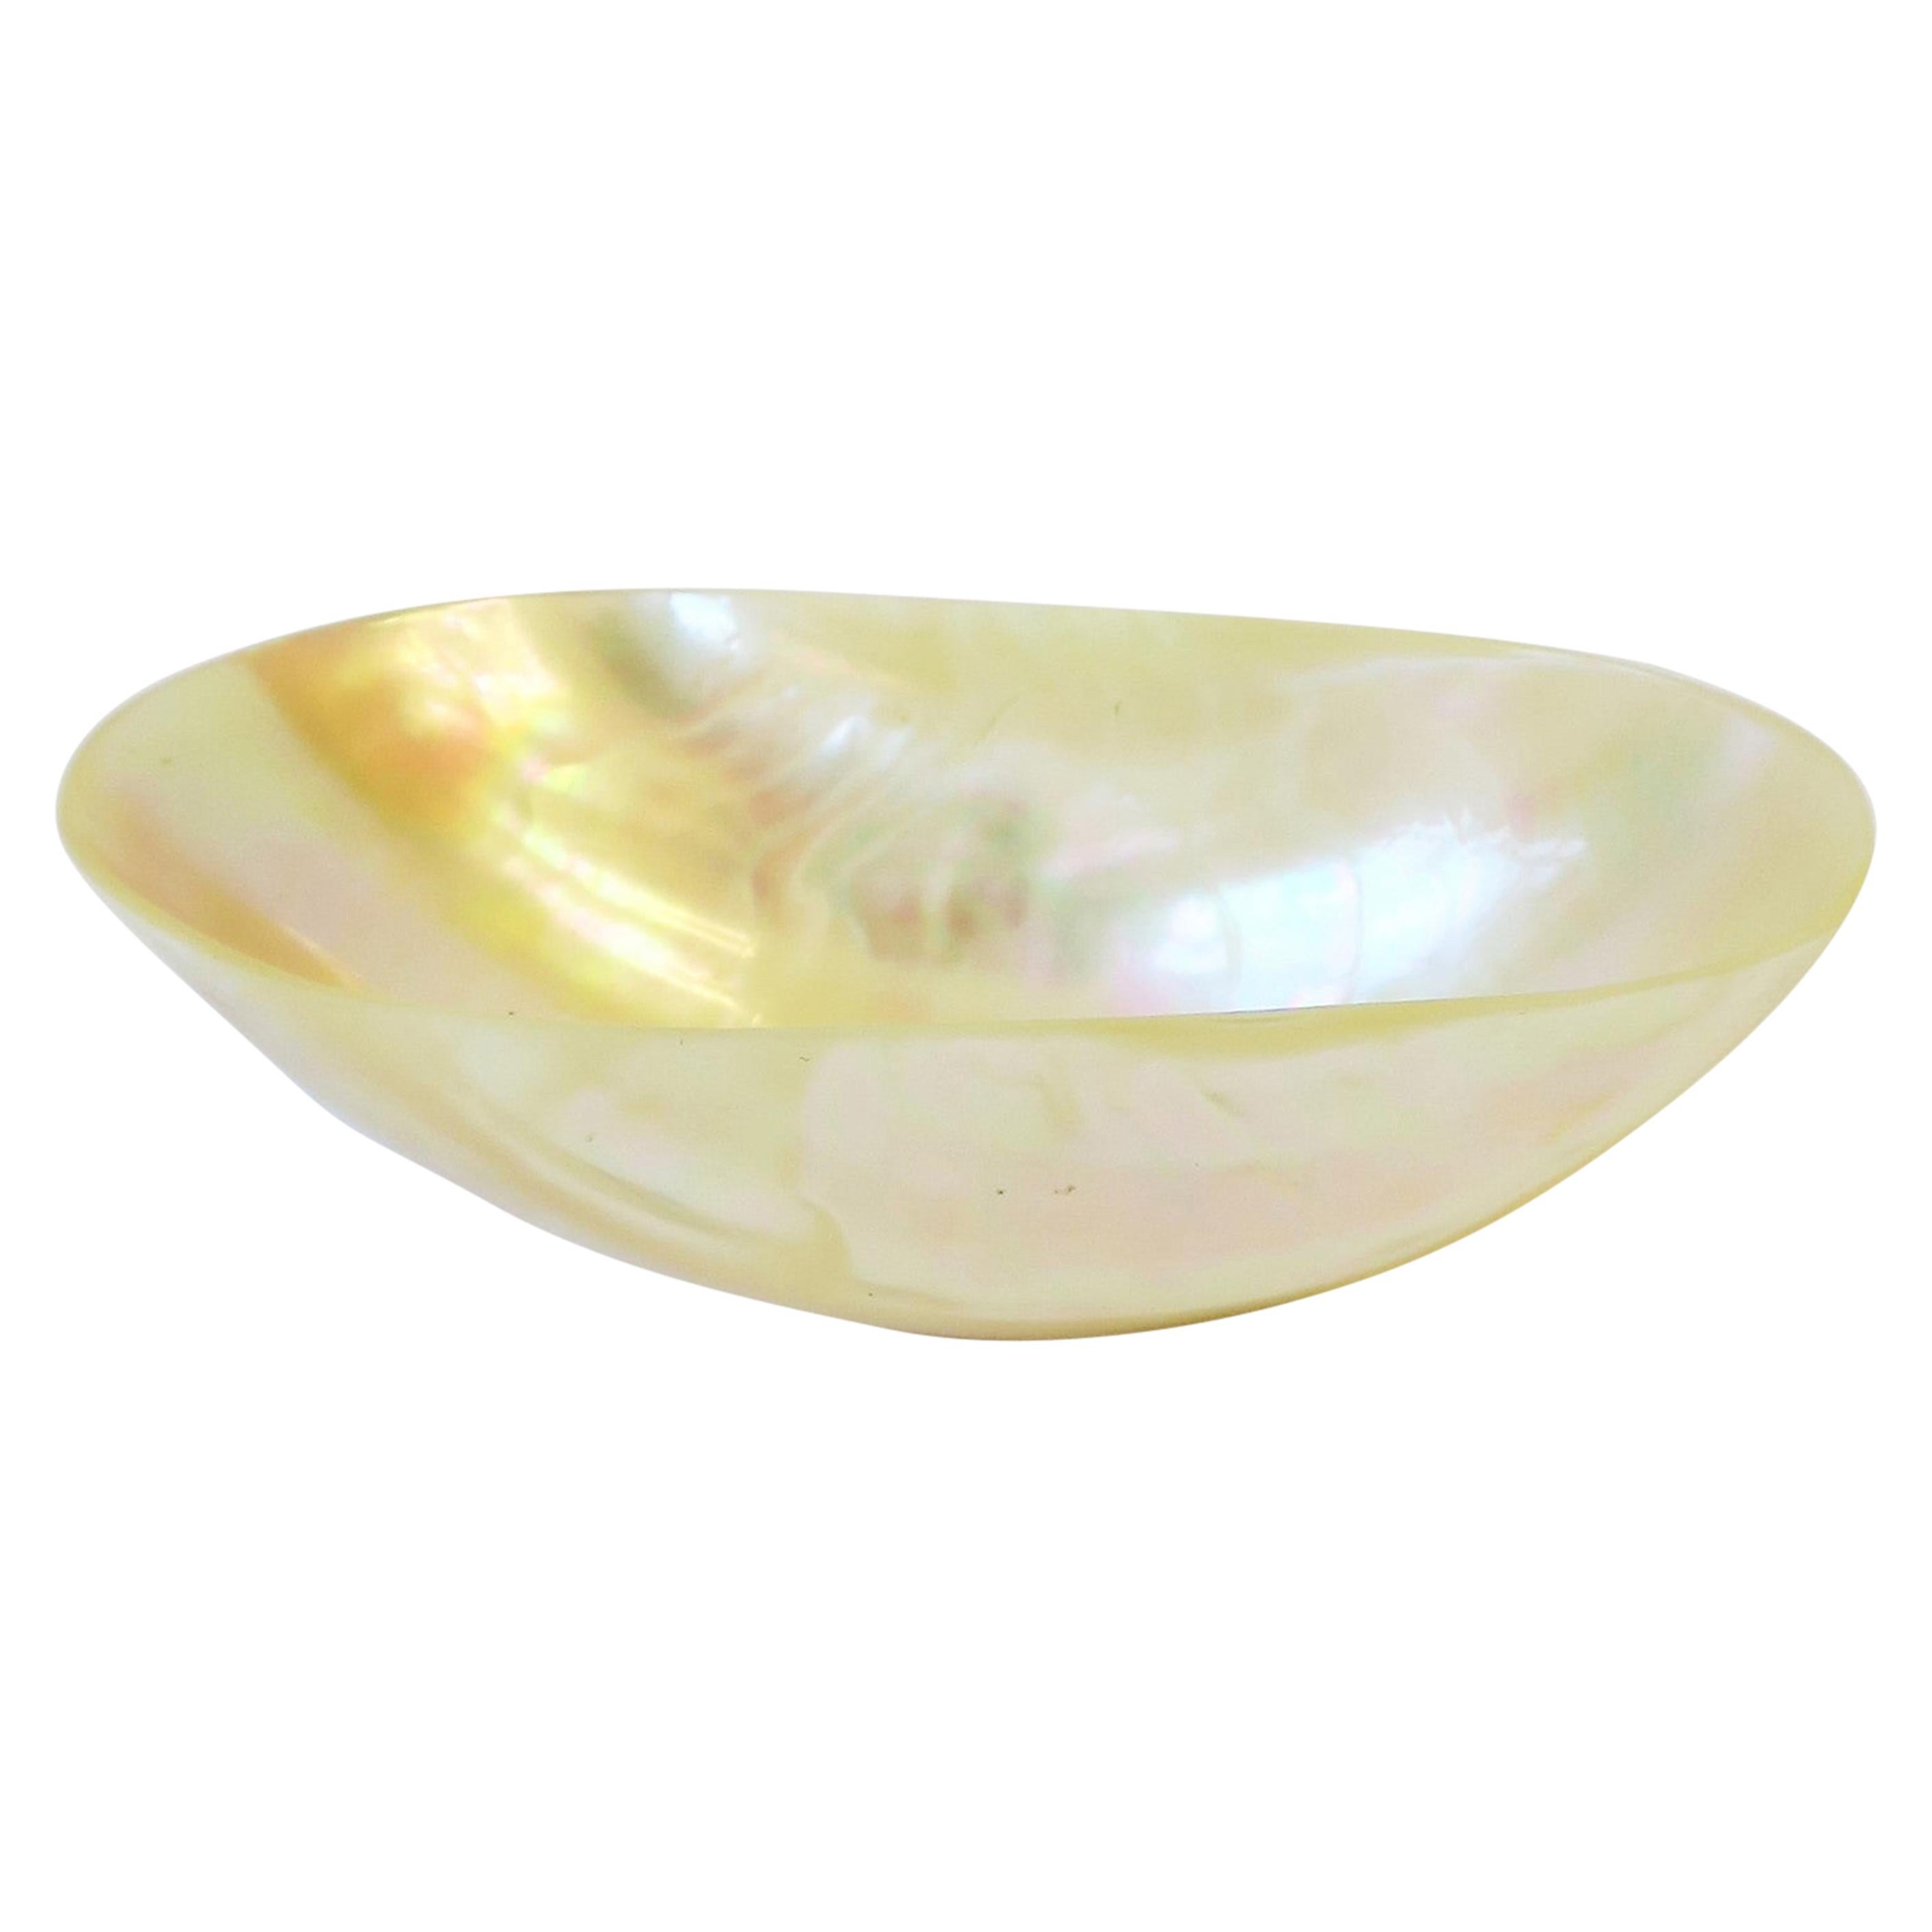 Mother of Pearl Dish